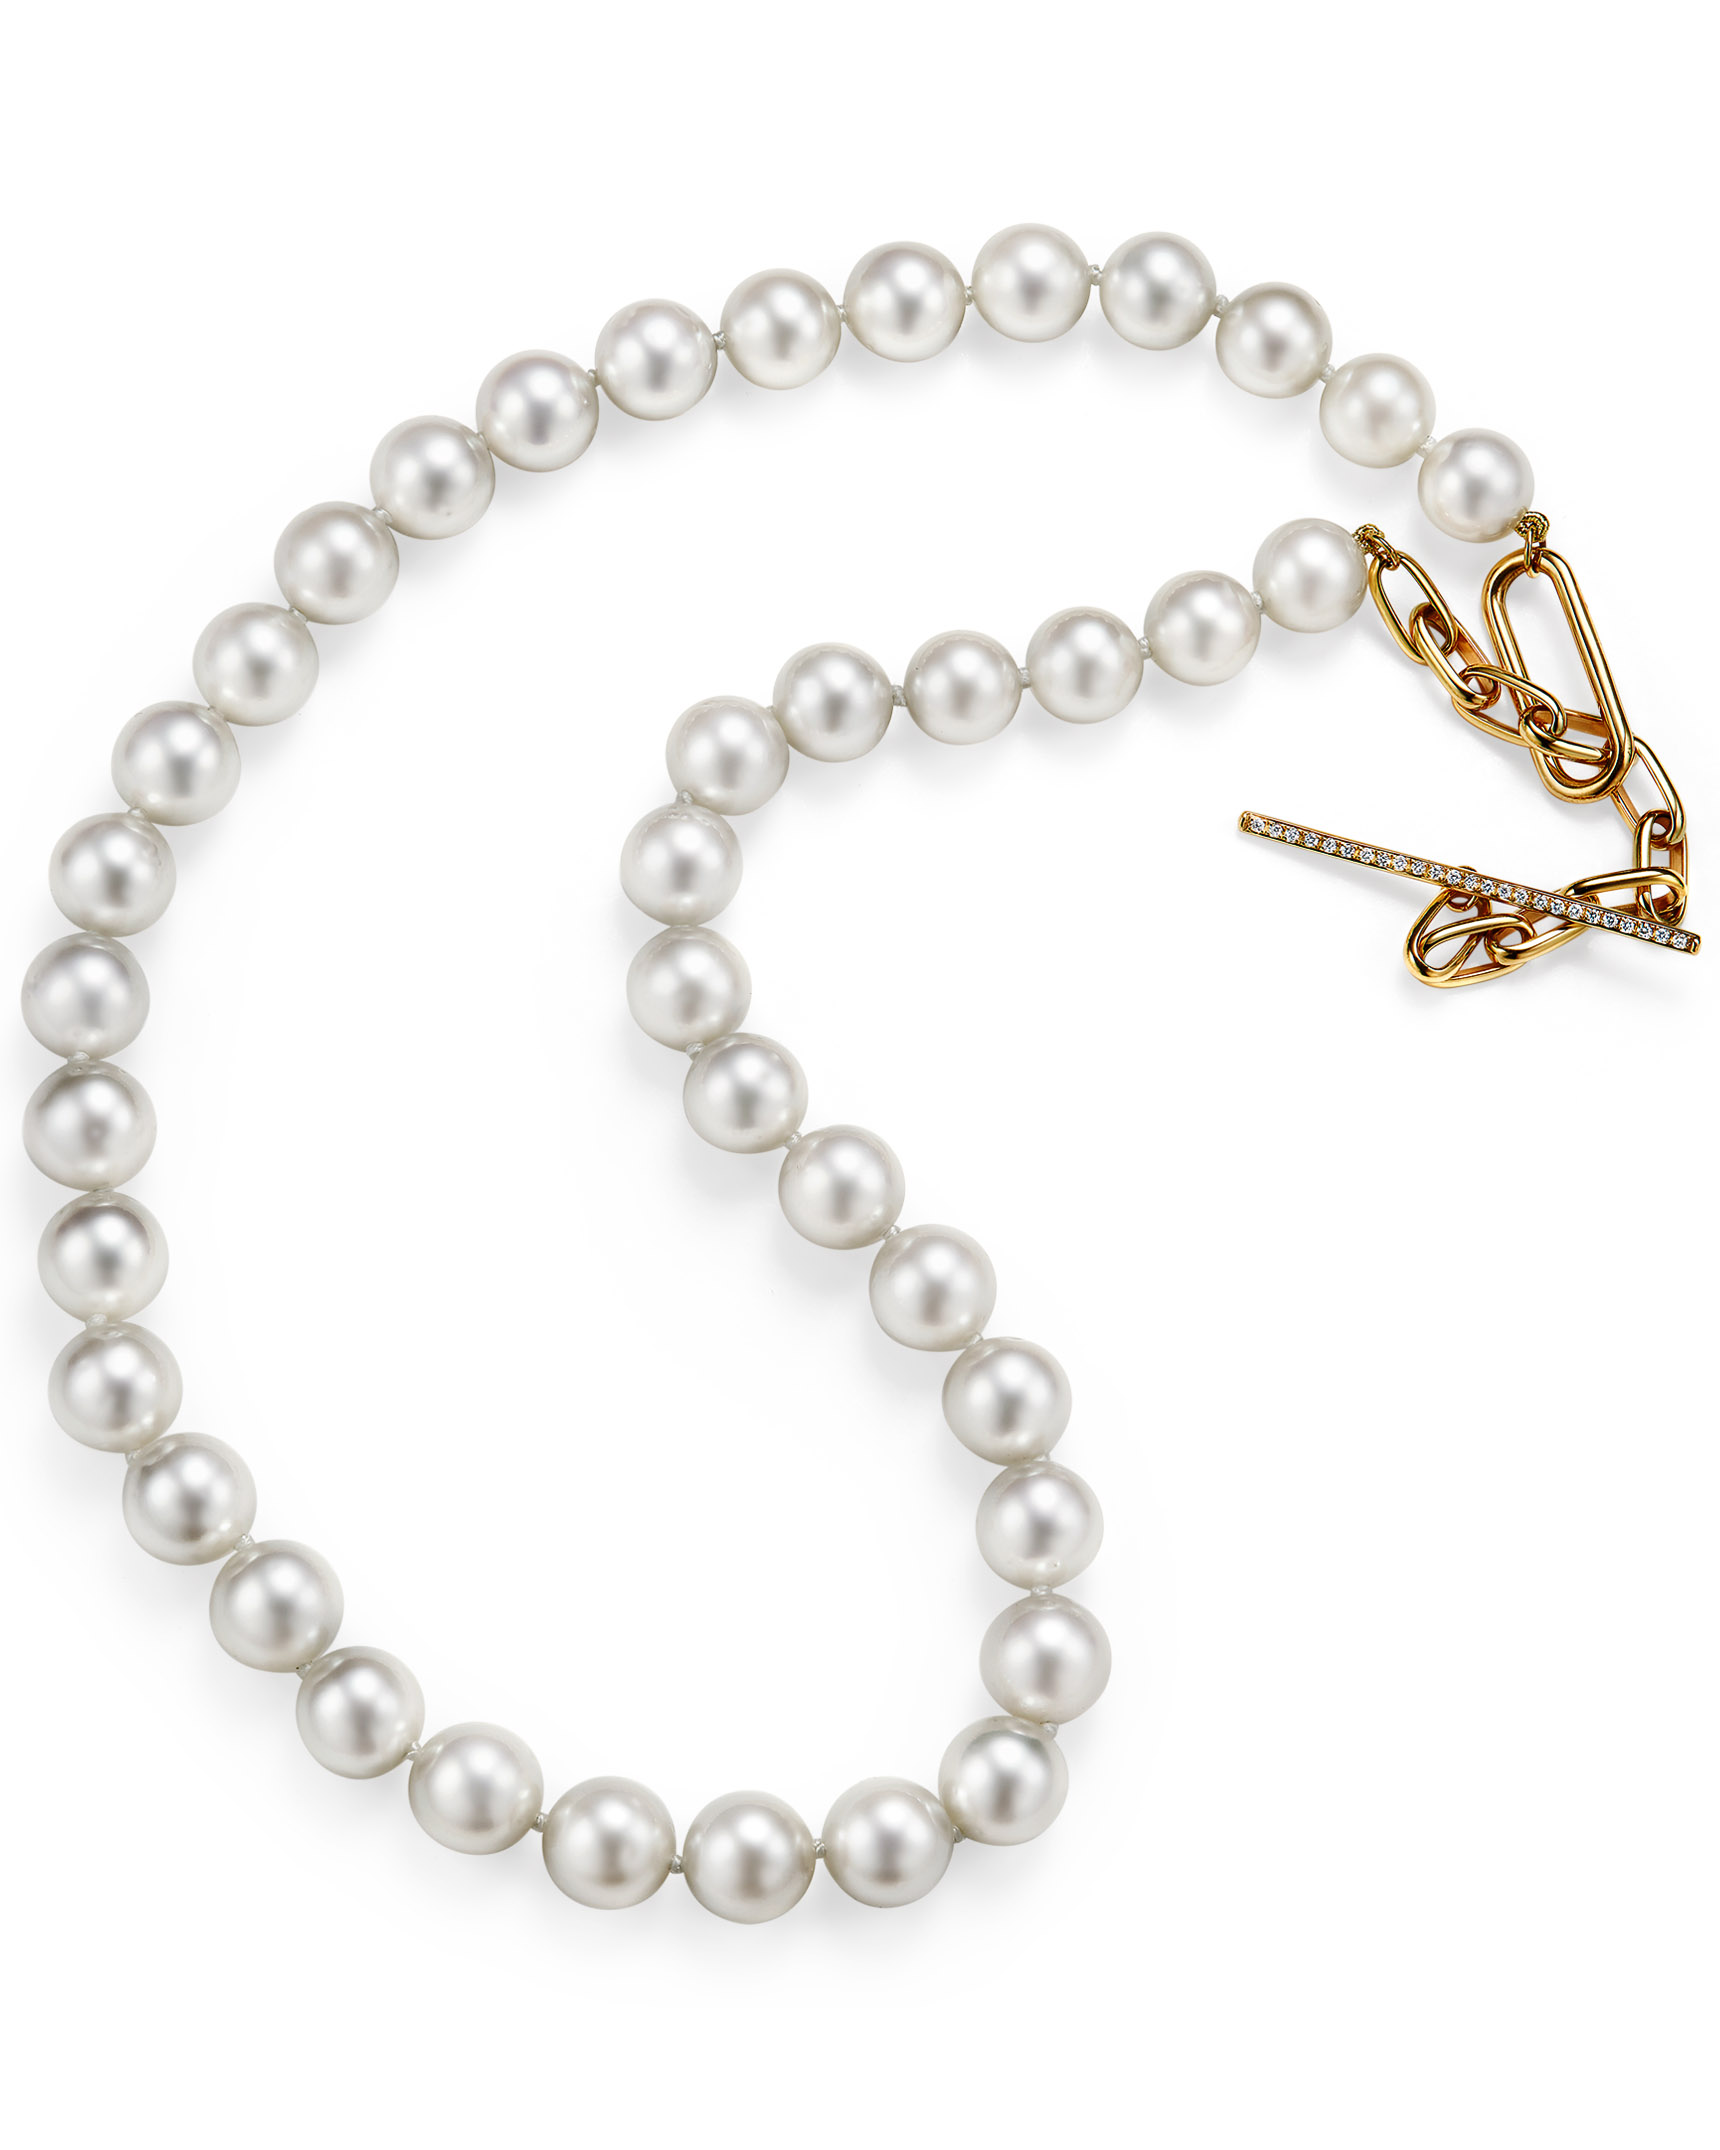 Natural pearls necklace combo with large link chain, toggle clasp